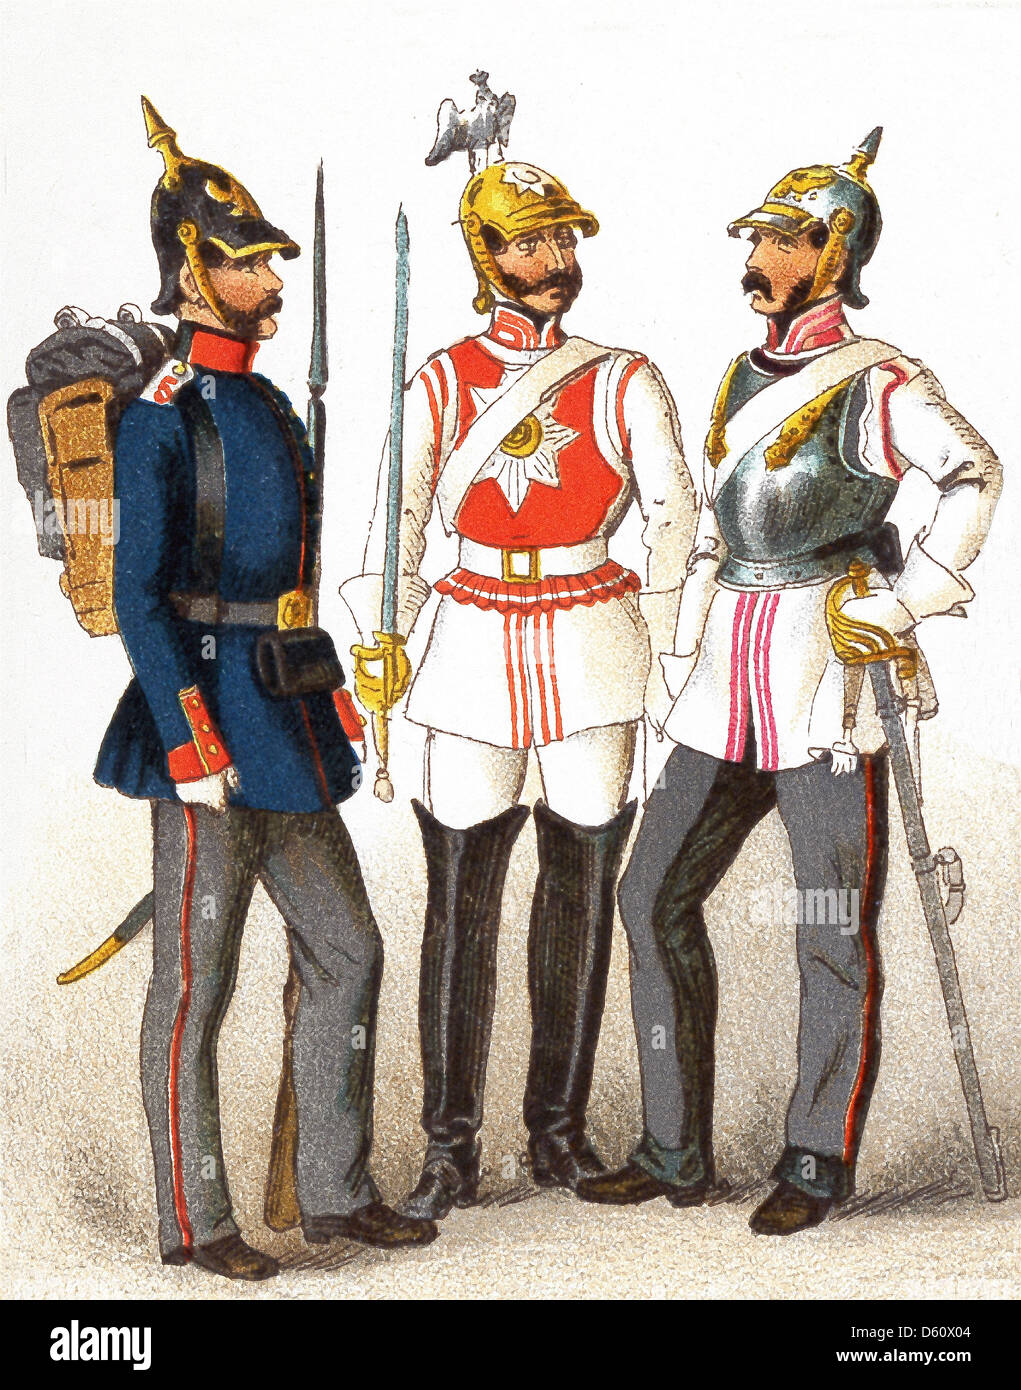 The figures represented here are, from left to right: Prussian 1846: The line, Body Guard, and Cuirassier. Stock Photo